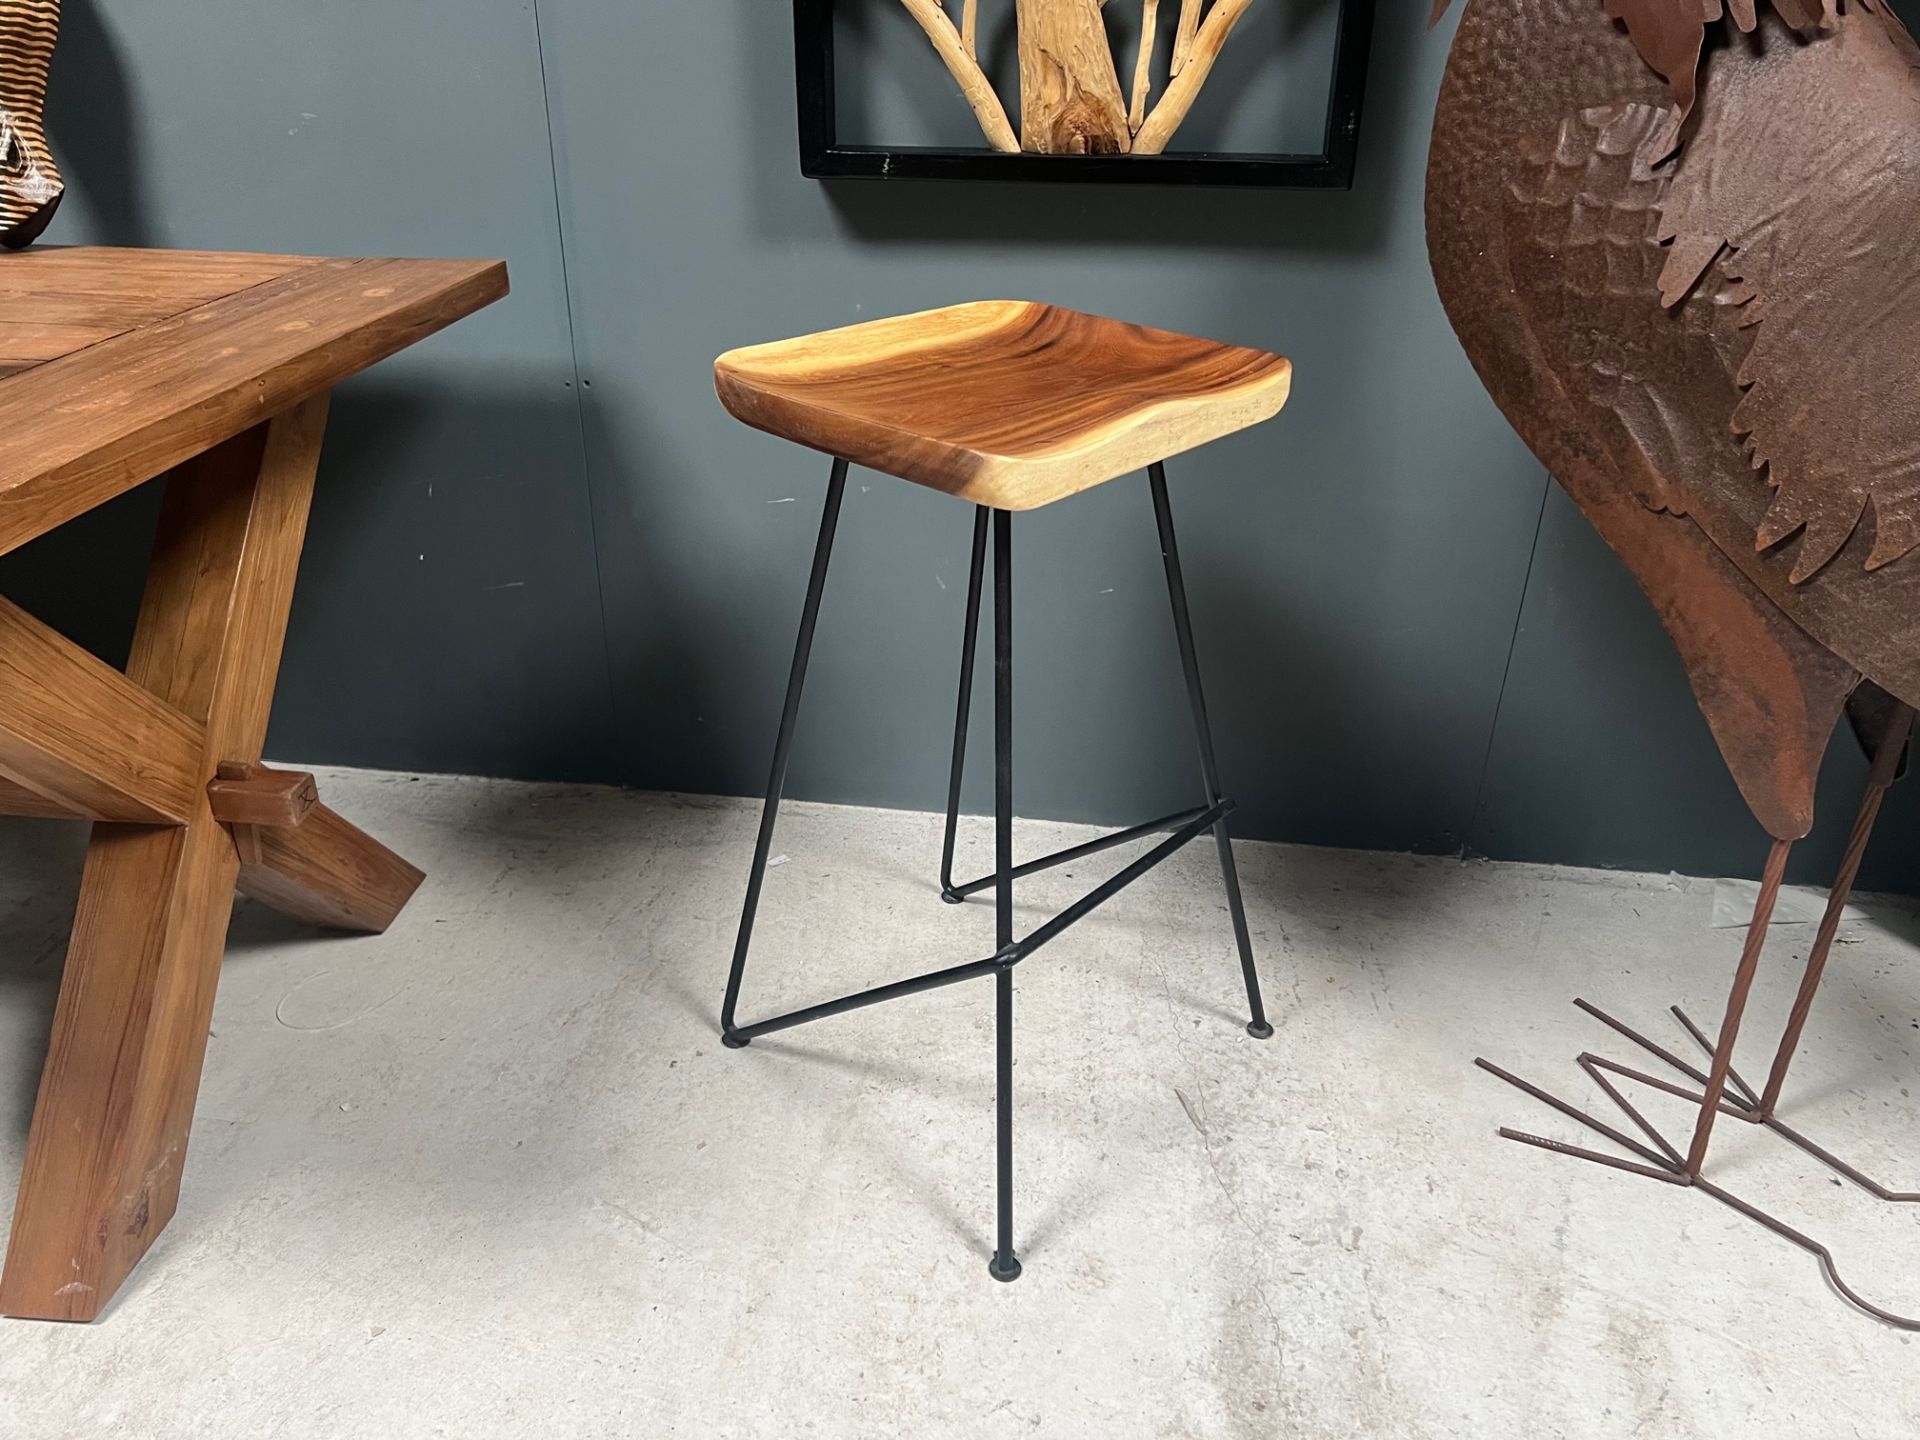 Boxed New Vintage Industrial Bar Stool With Polished Wooden Stool And Metal Base - Image 2 of 2